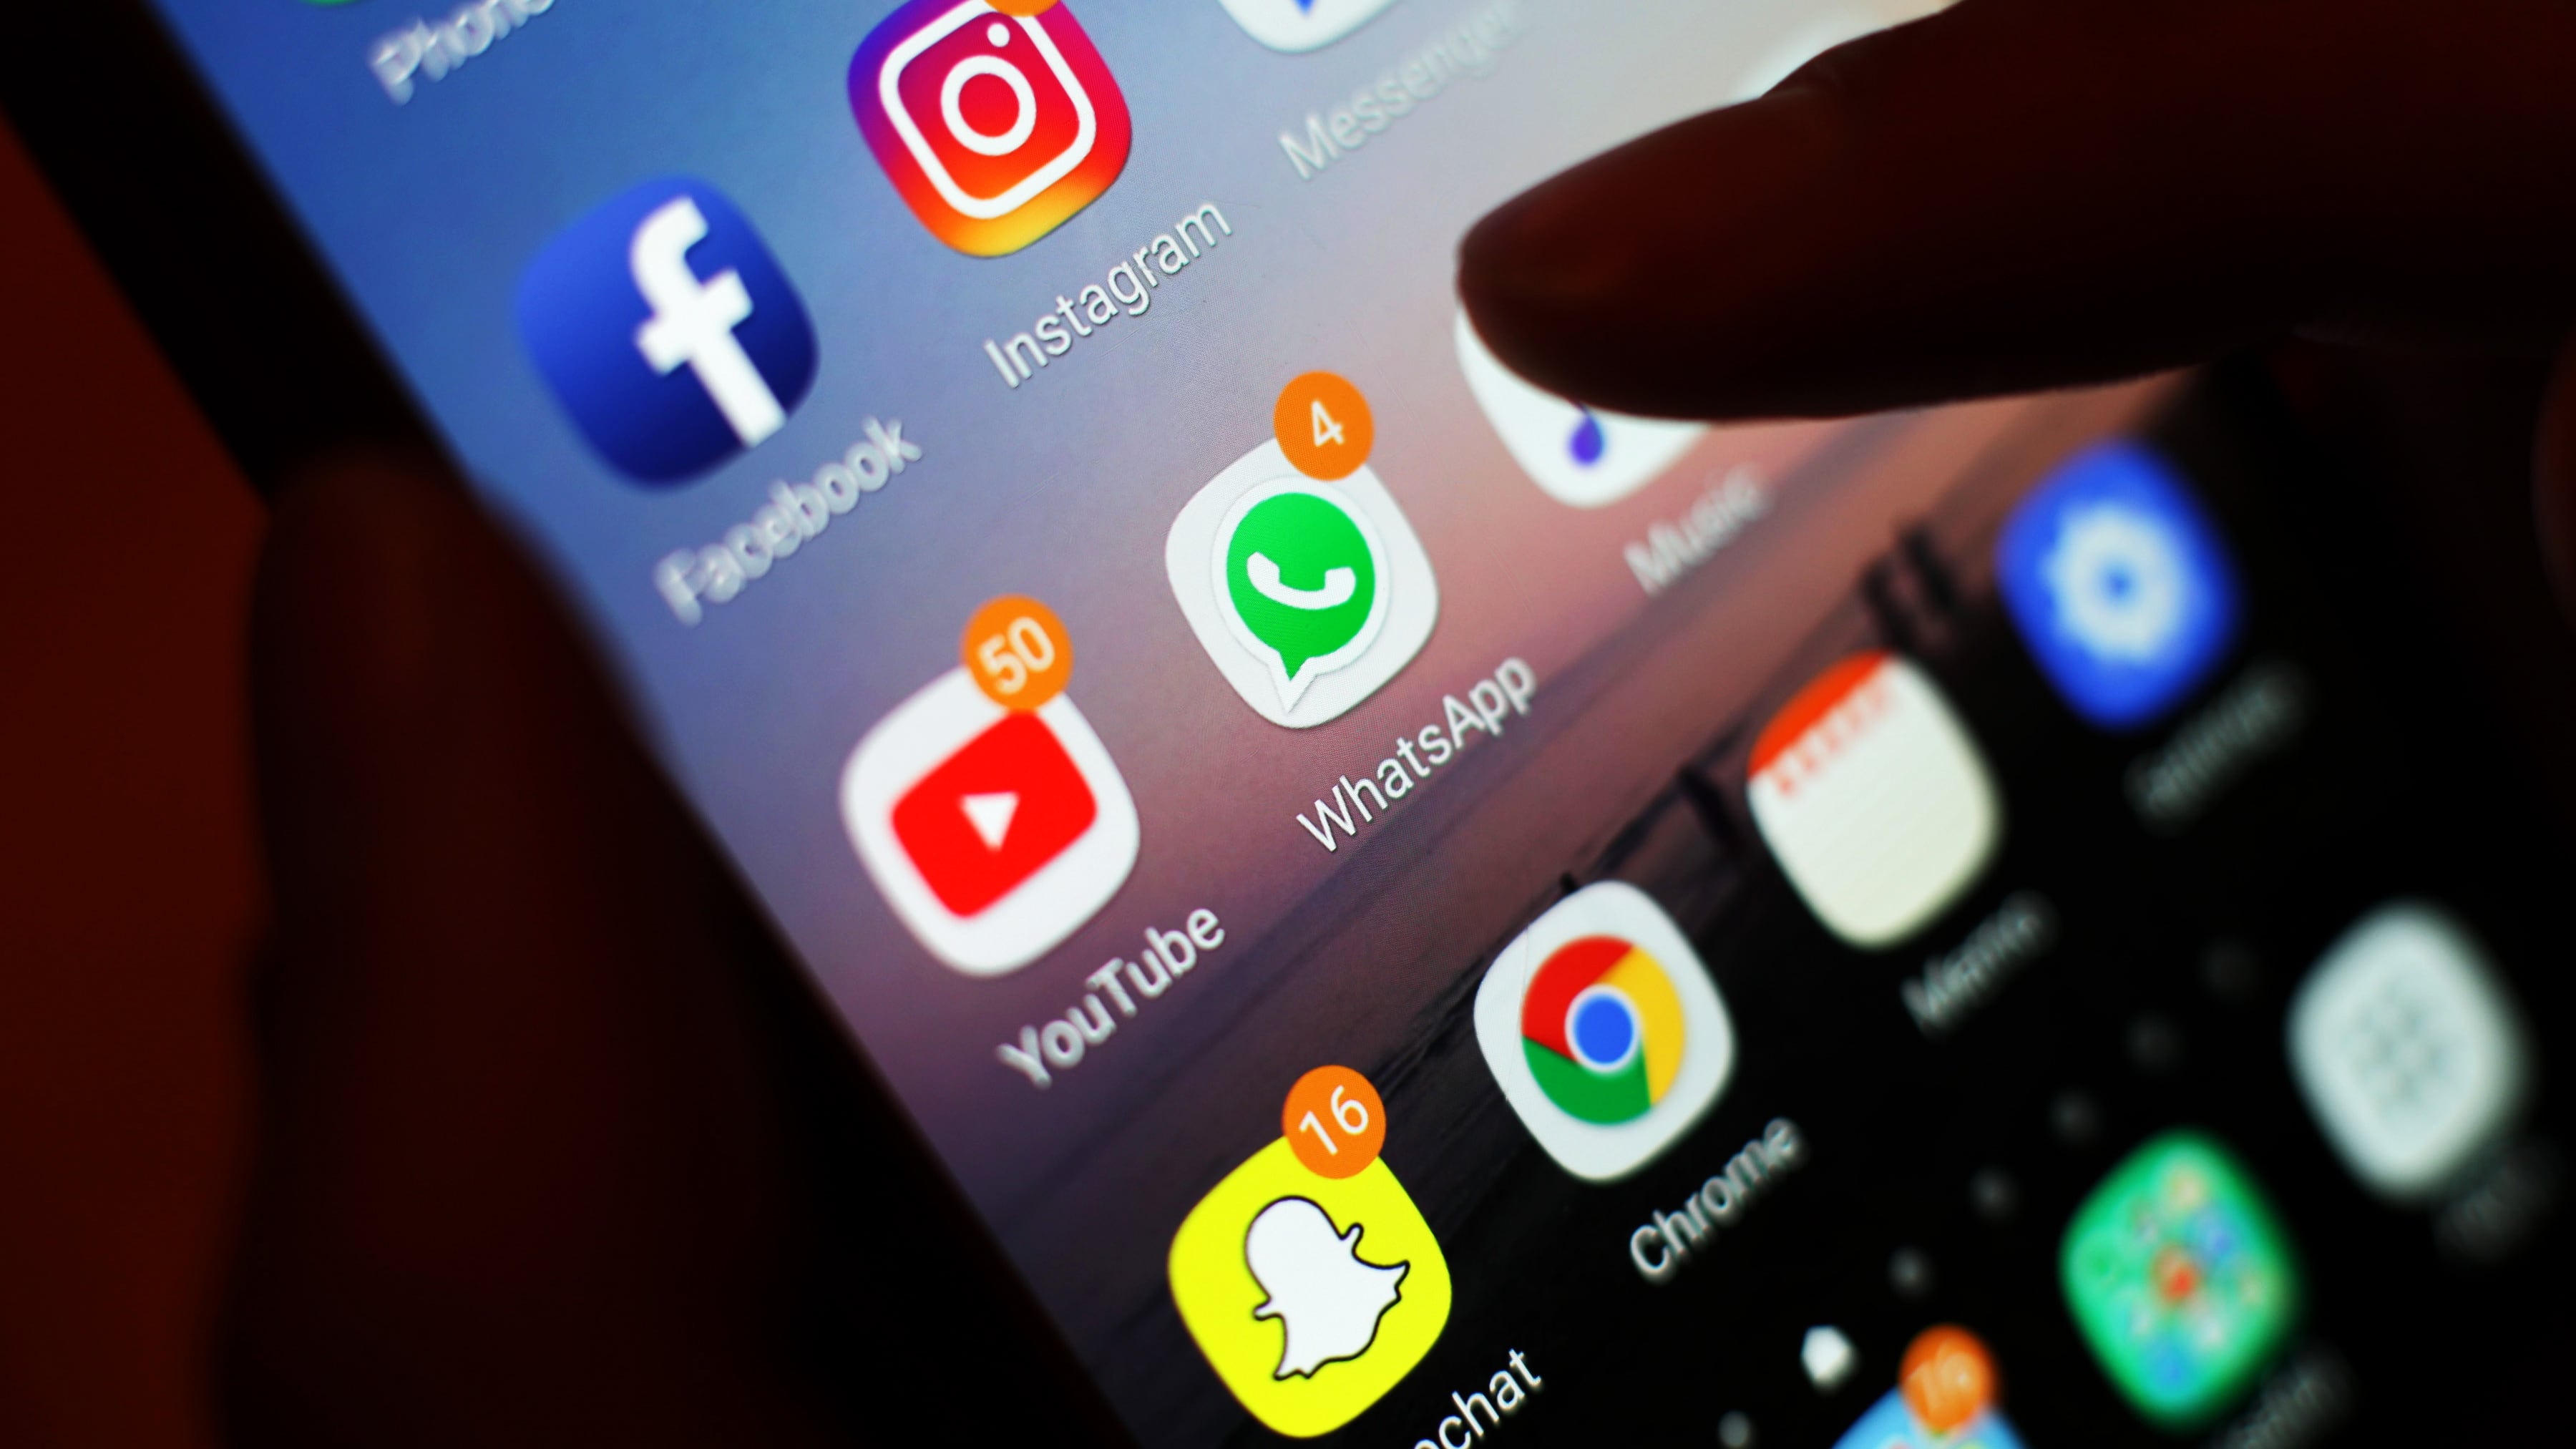 The head of the National Education Union has said the Government should hold an inquiry into ‘dangerous’ content which young people are able to access on their smartphones